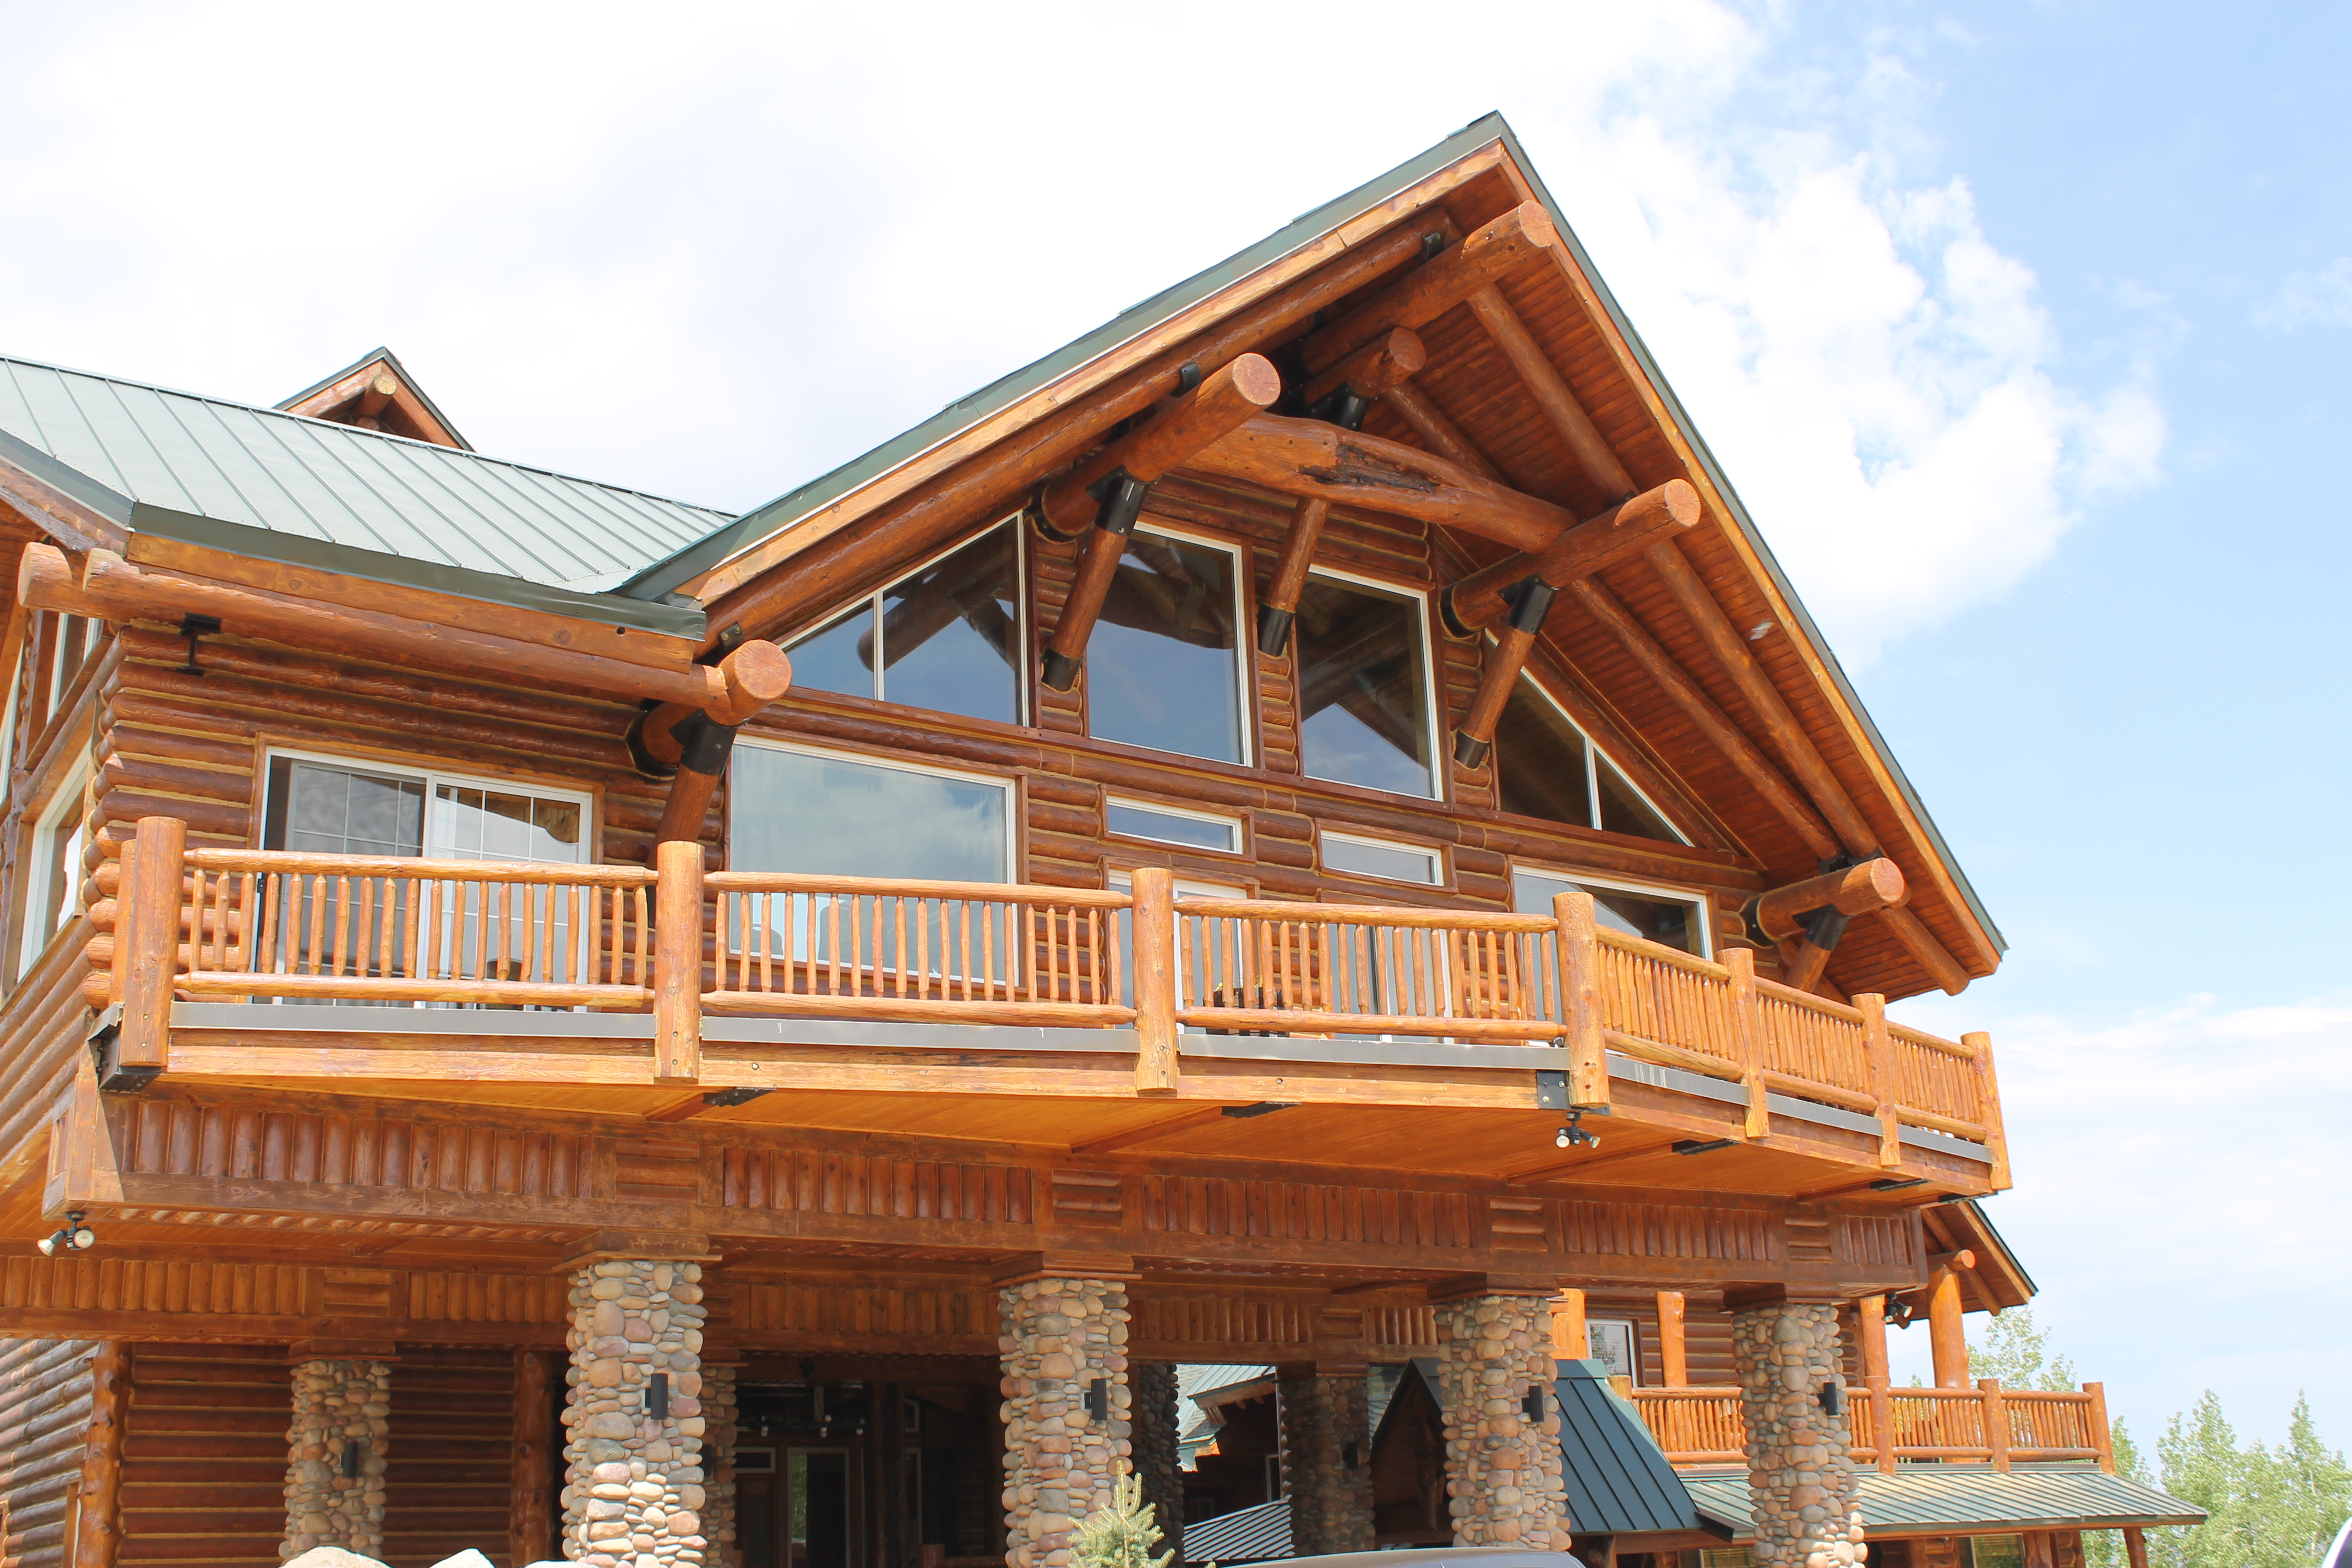 Largest Mountain Lodge in the U.S.